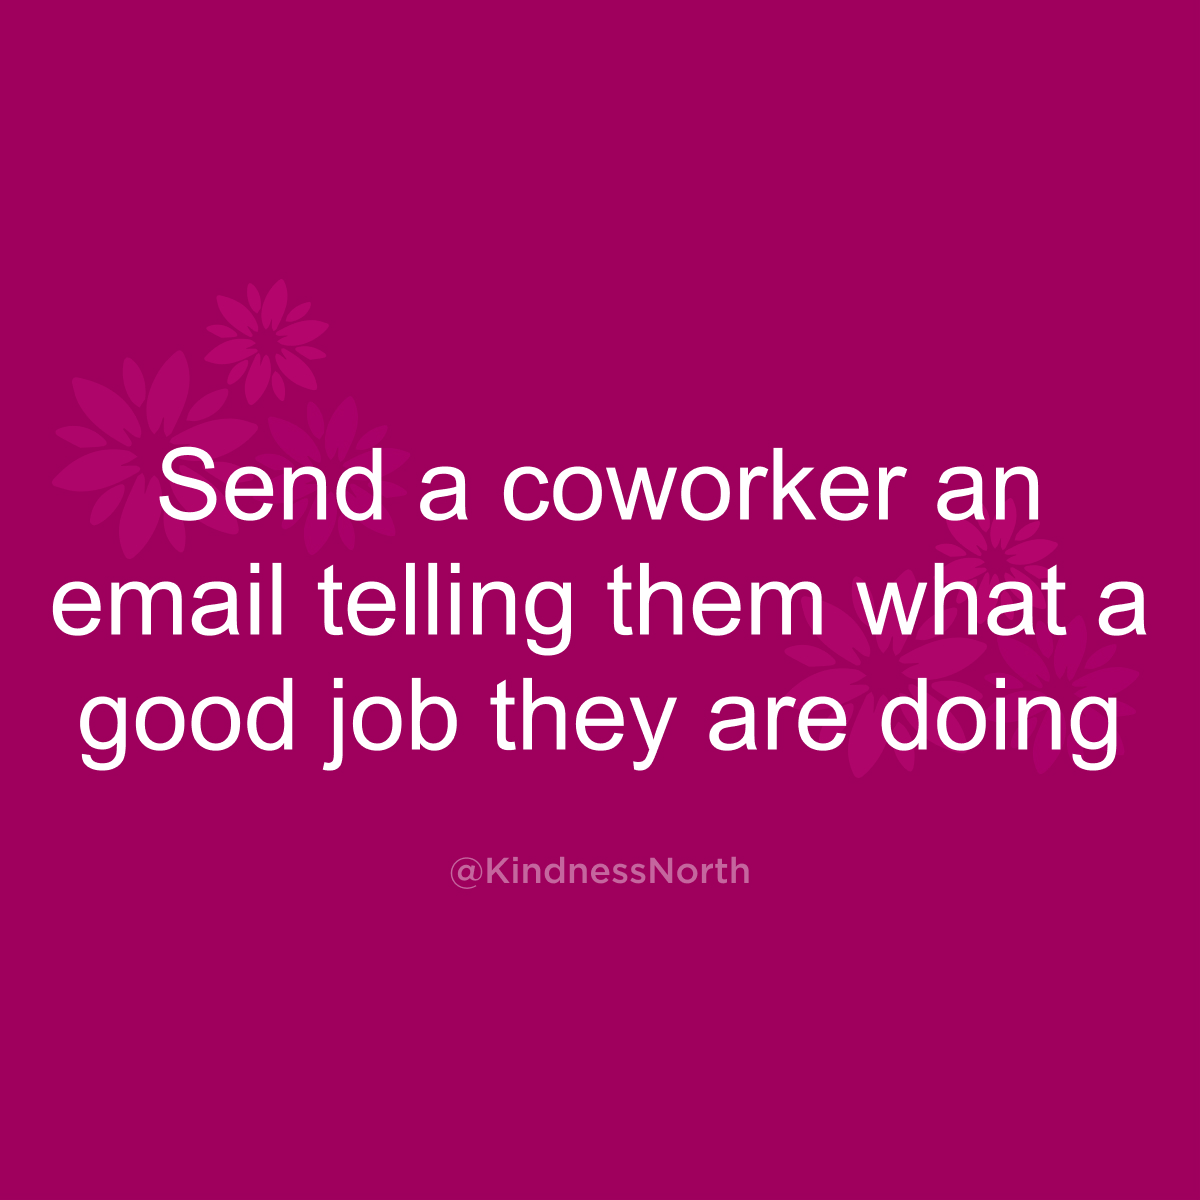 Send a coworker an email telling them what a good job they are doing